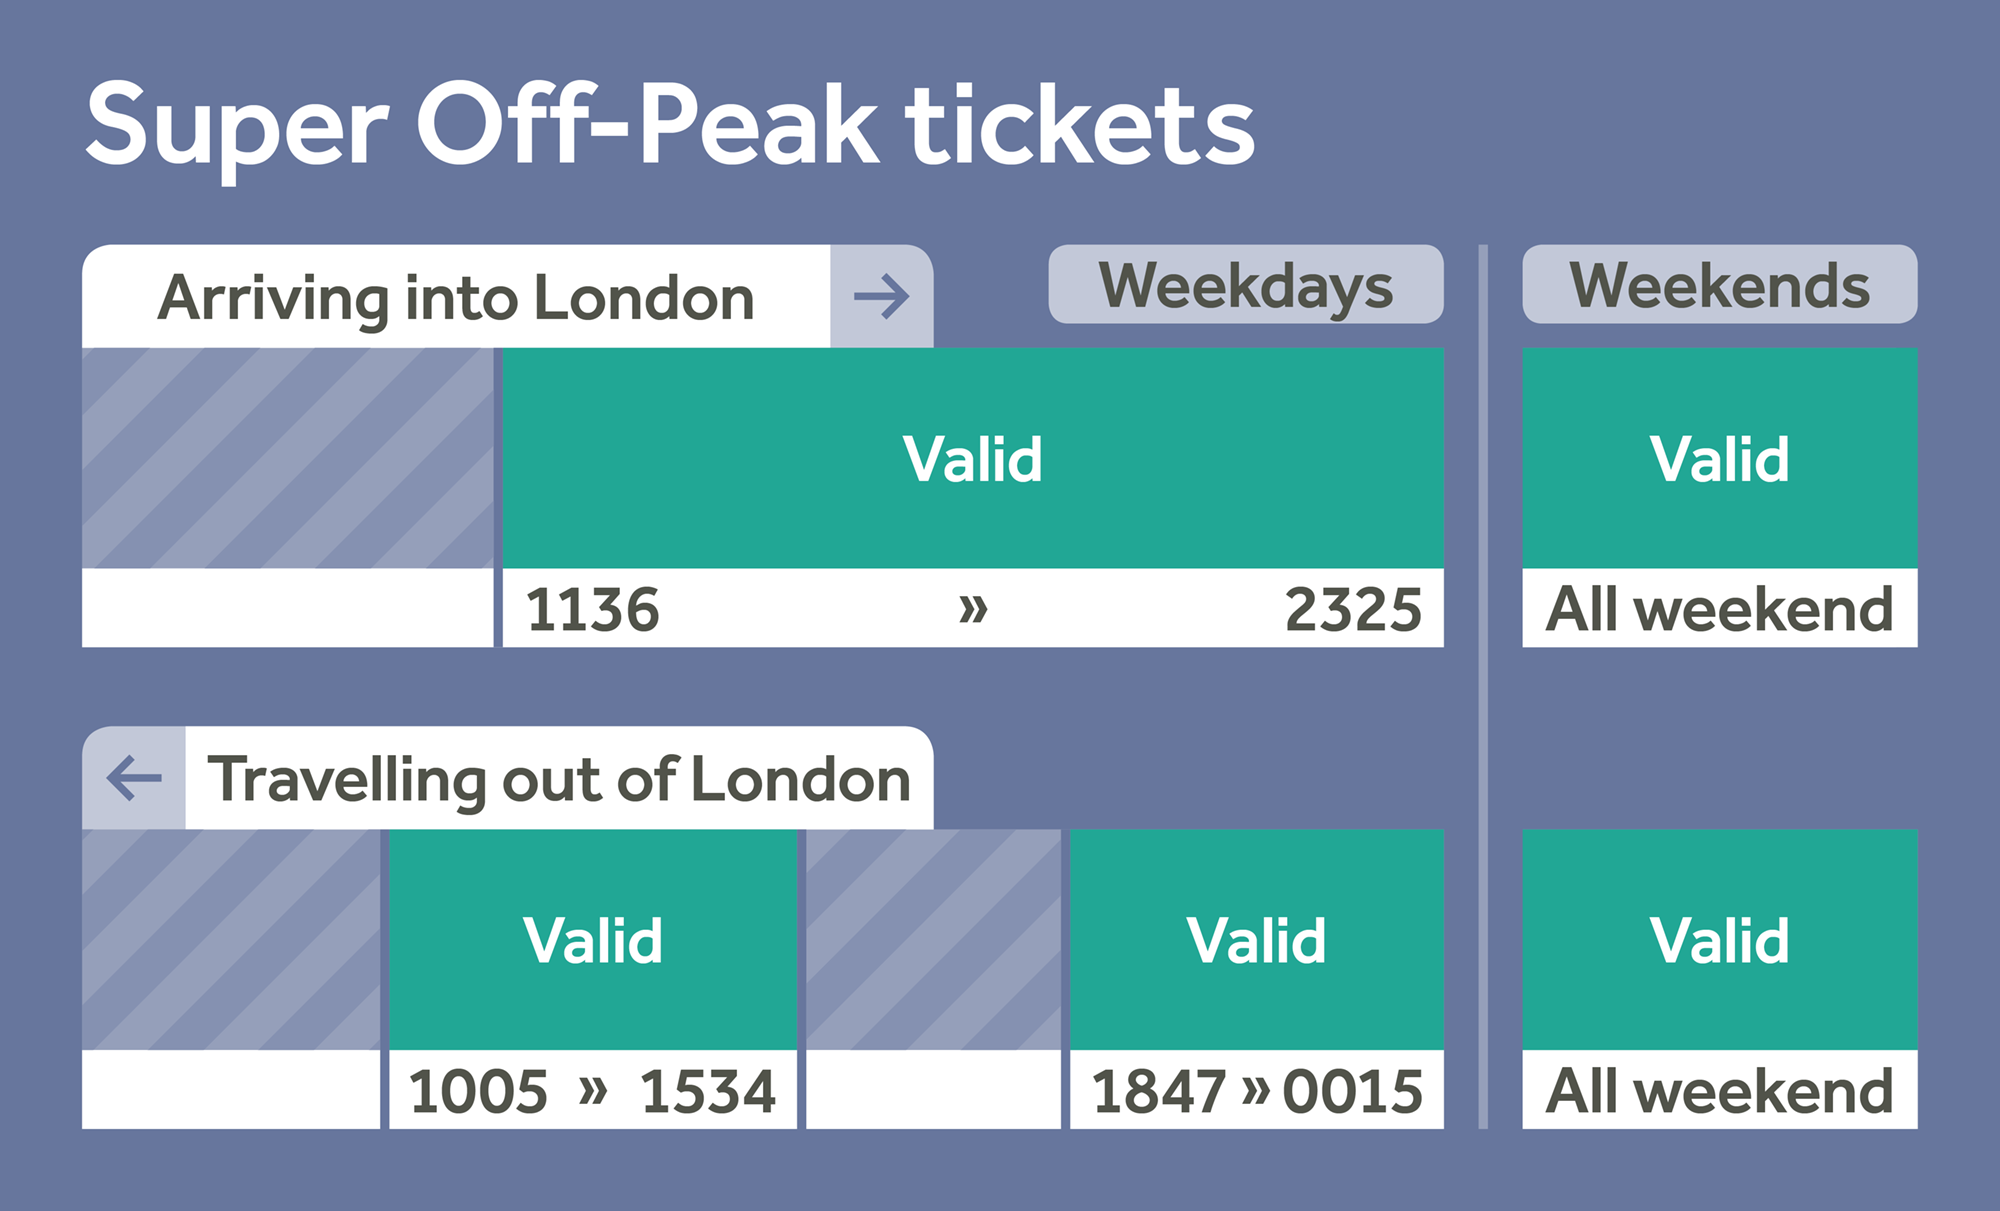 Super Off-peak tickets arriving into London are valid between 11:36 and 23:25 on weekdays and are valid all weekend. Super Off-peak tickets travelling out of London are valid between 10:05 and 15:34, and also between 18:47 and 00:15 and are valid all weekend.